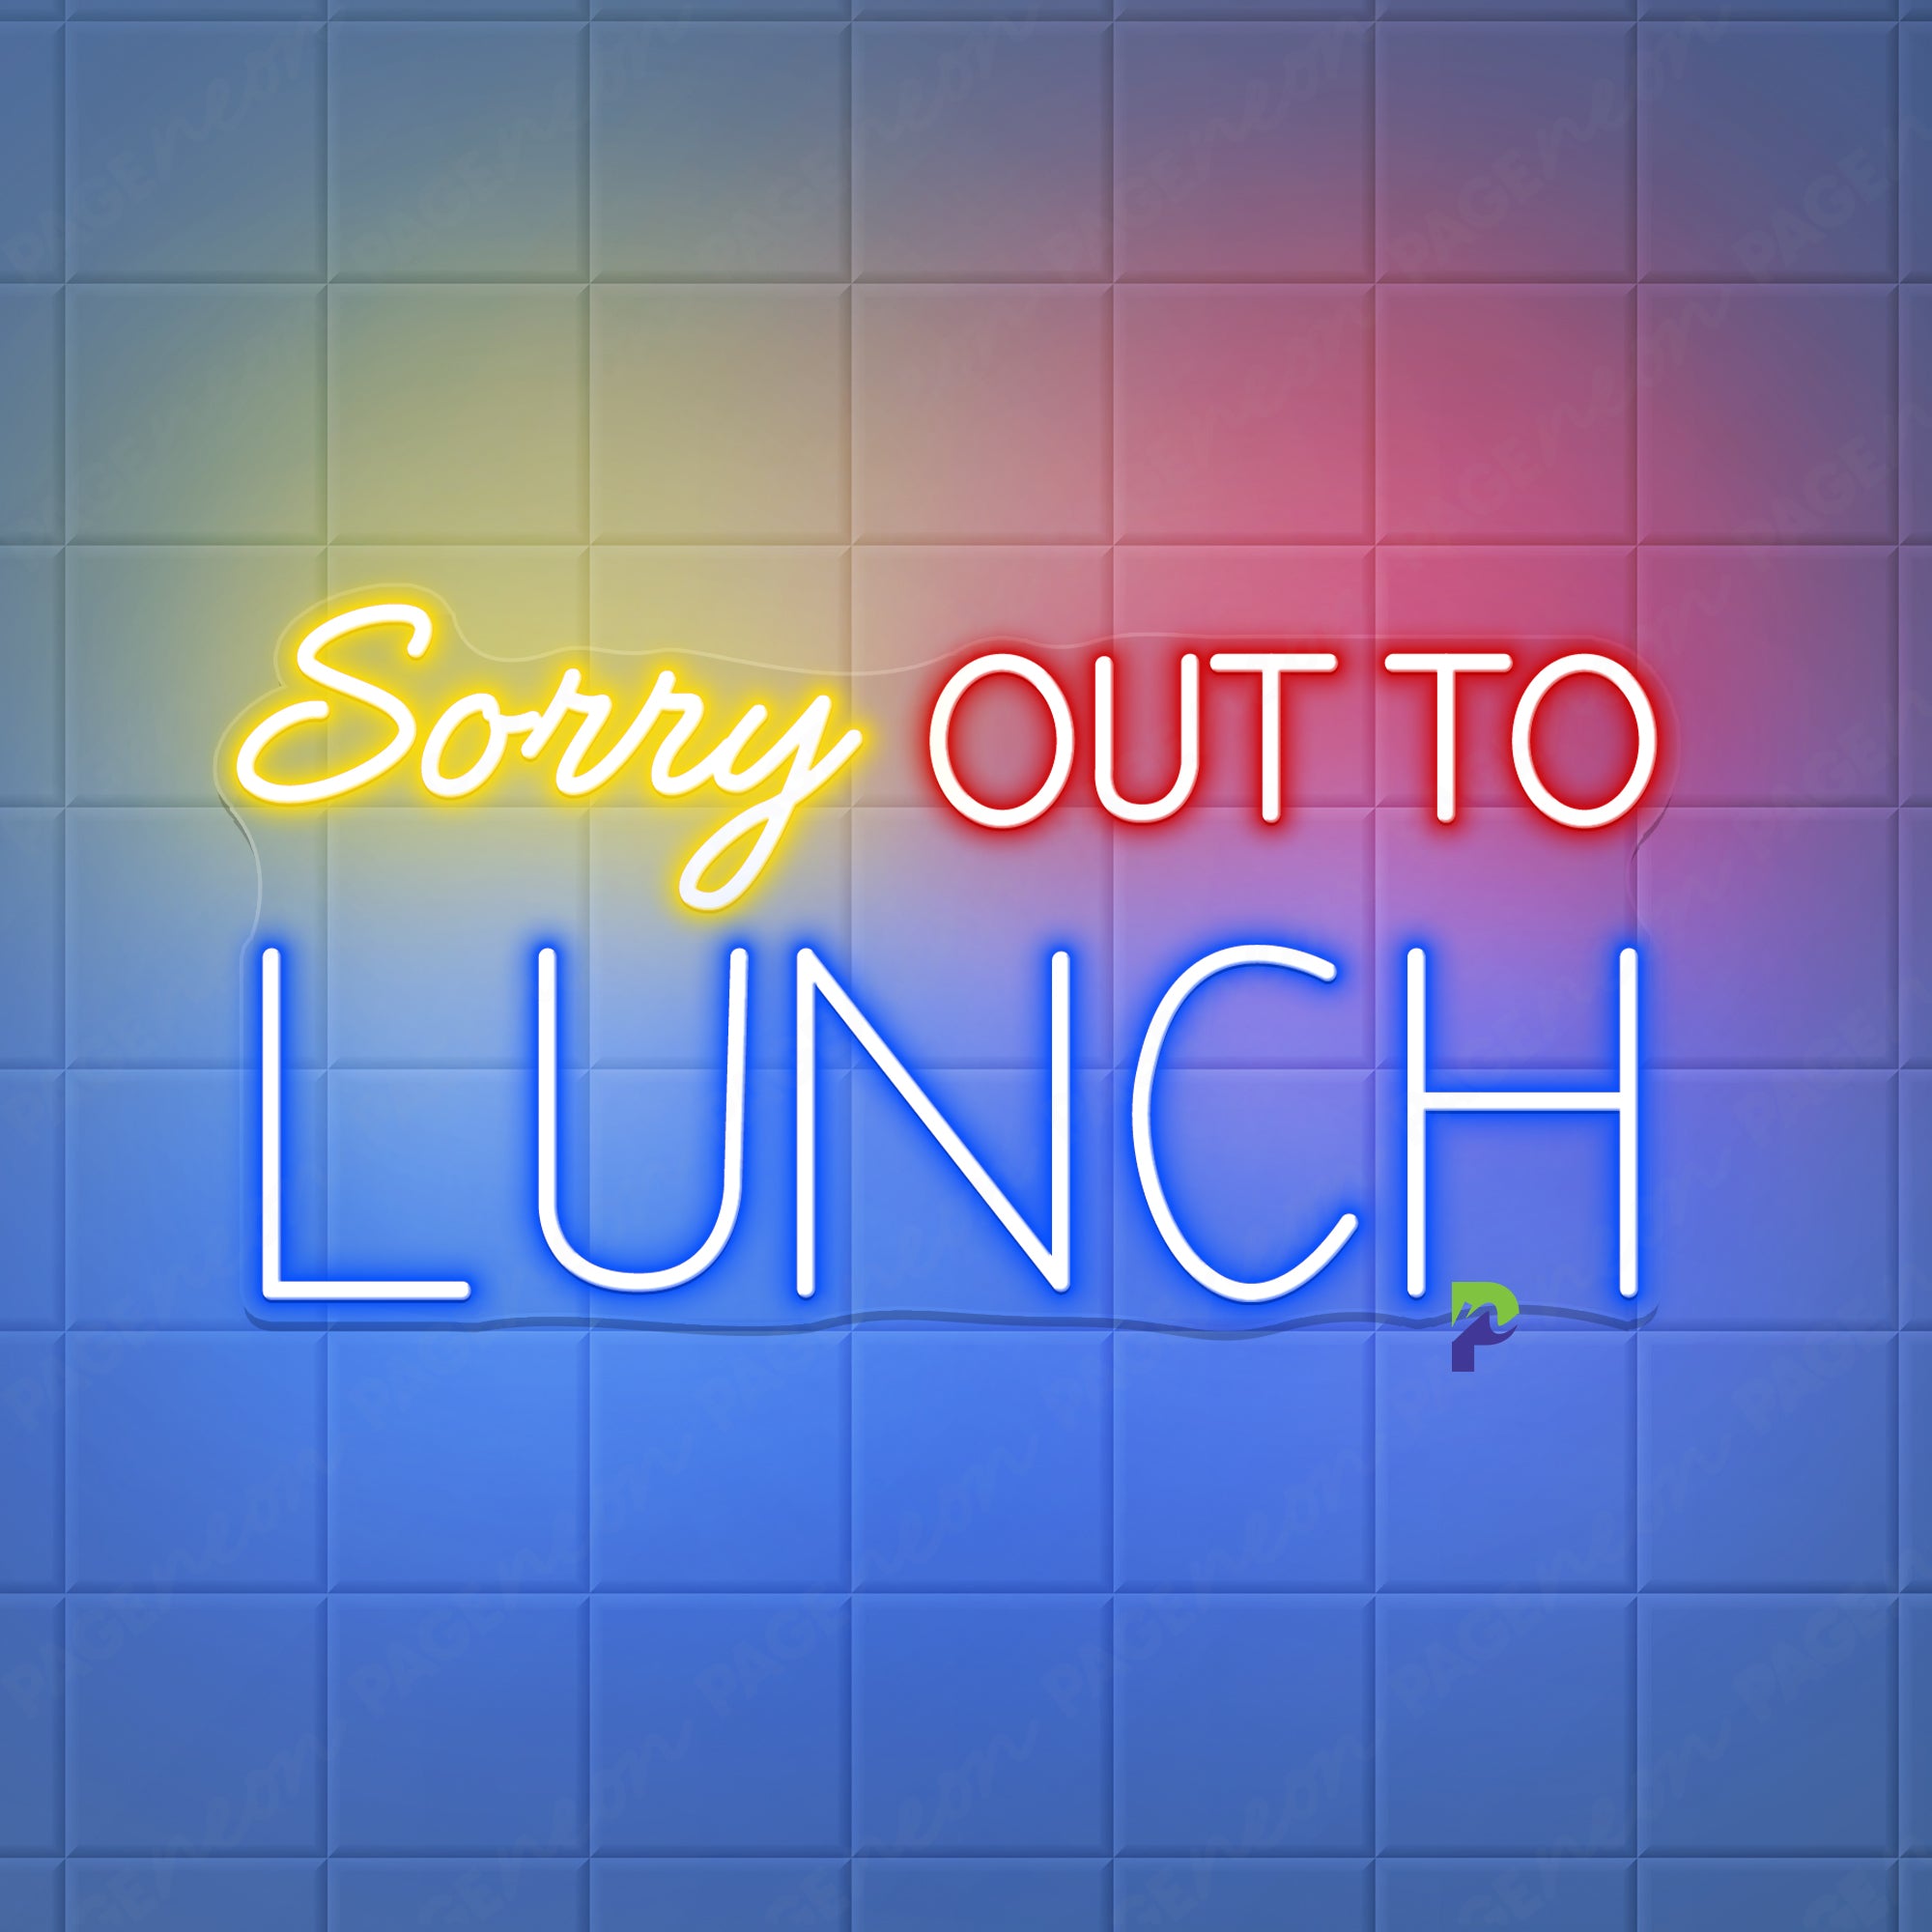 Sorry Out To Lunch Neon Sign For The Restaurant